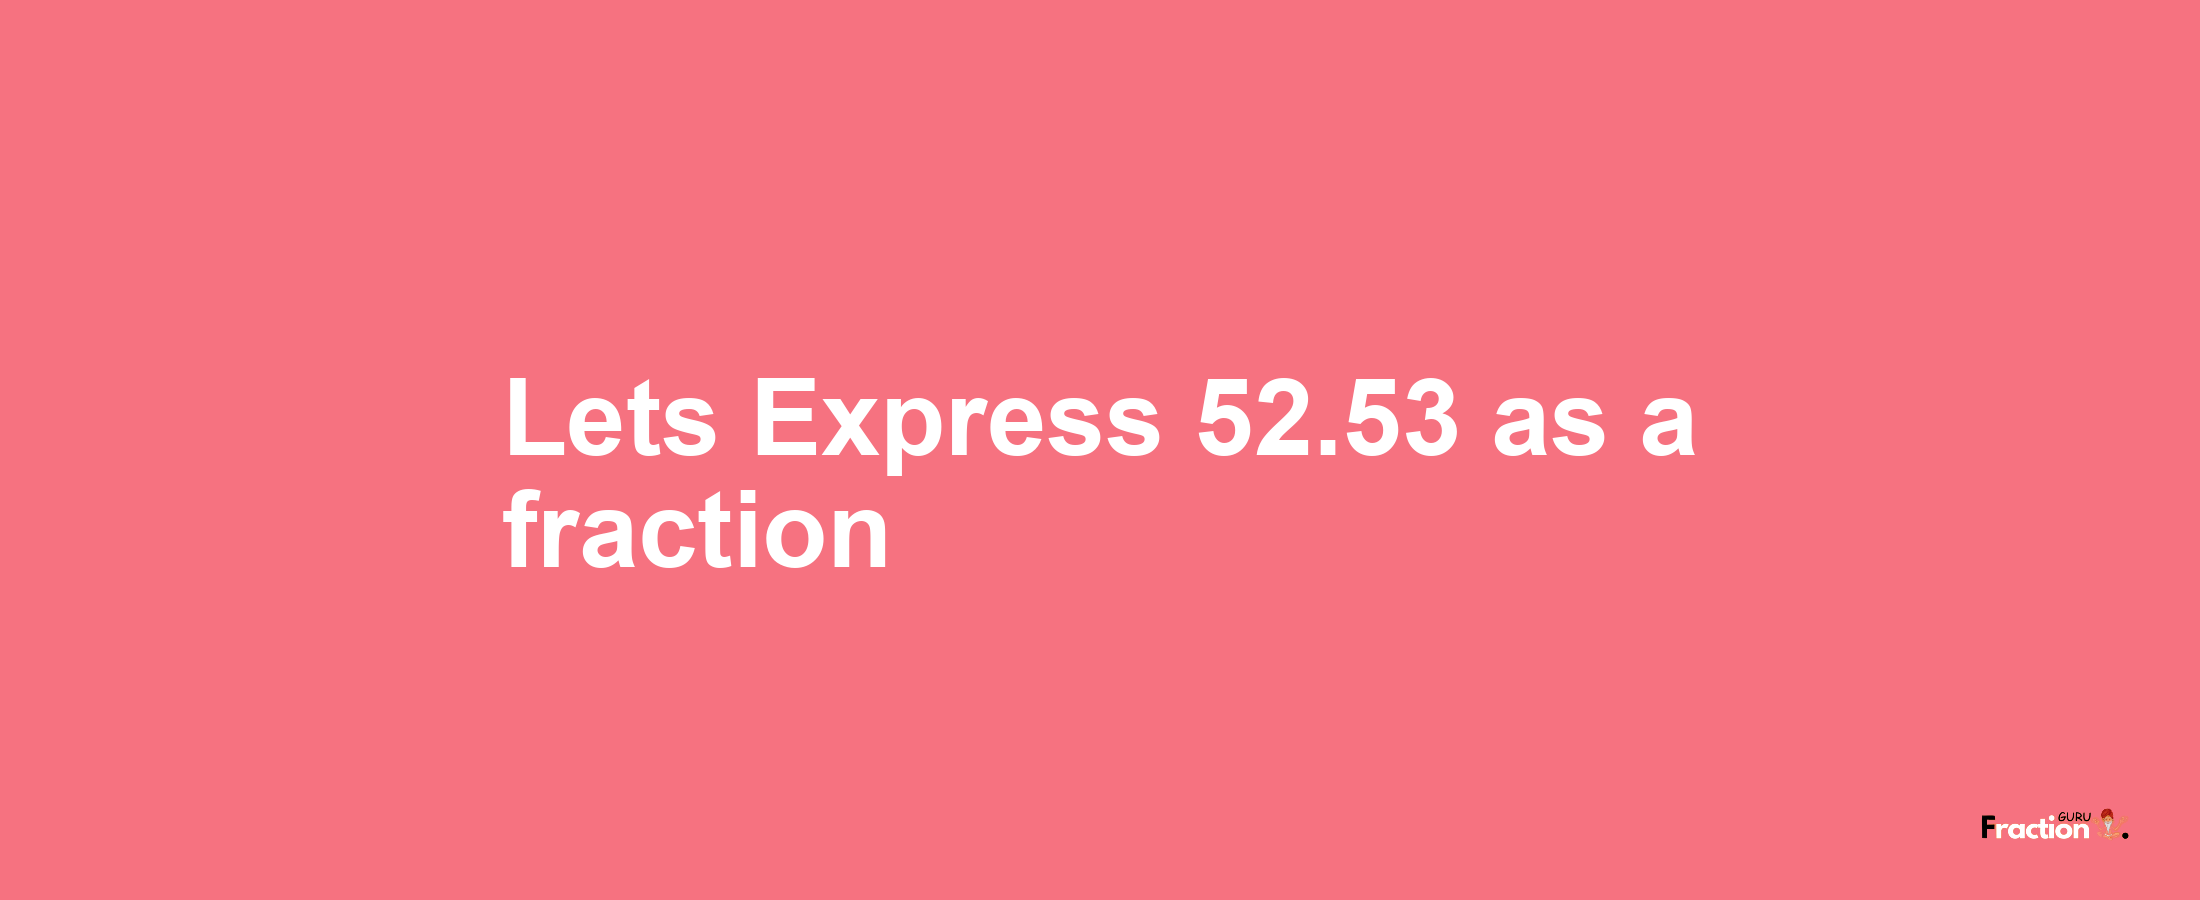 Lets Express 52.53 as afraction